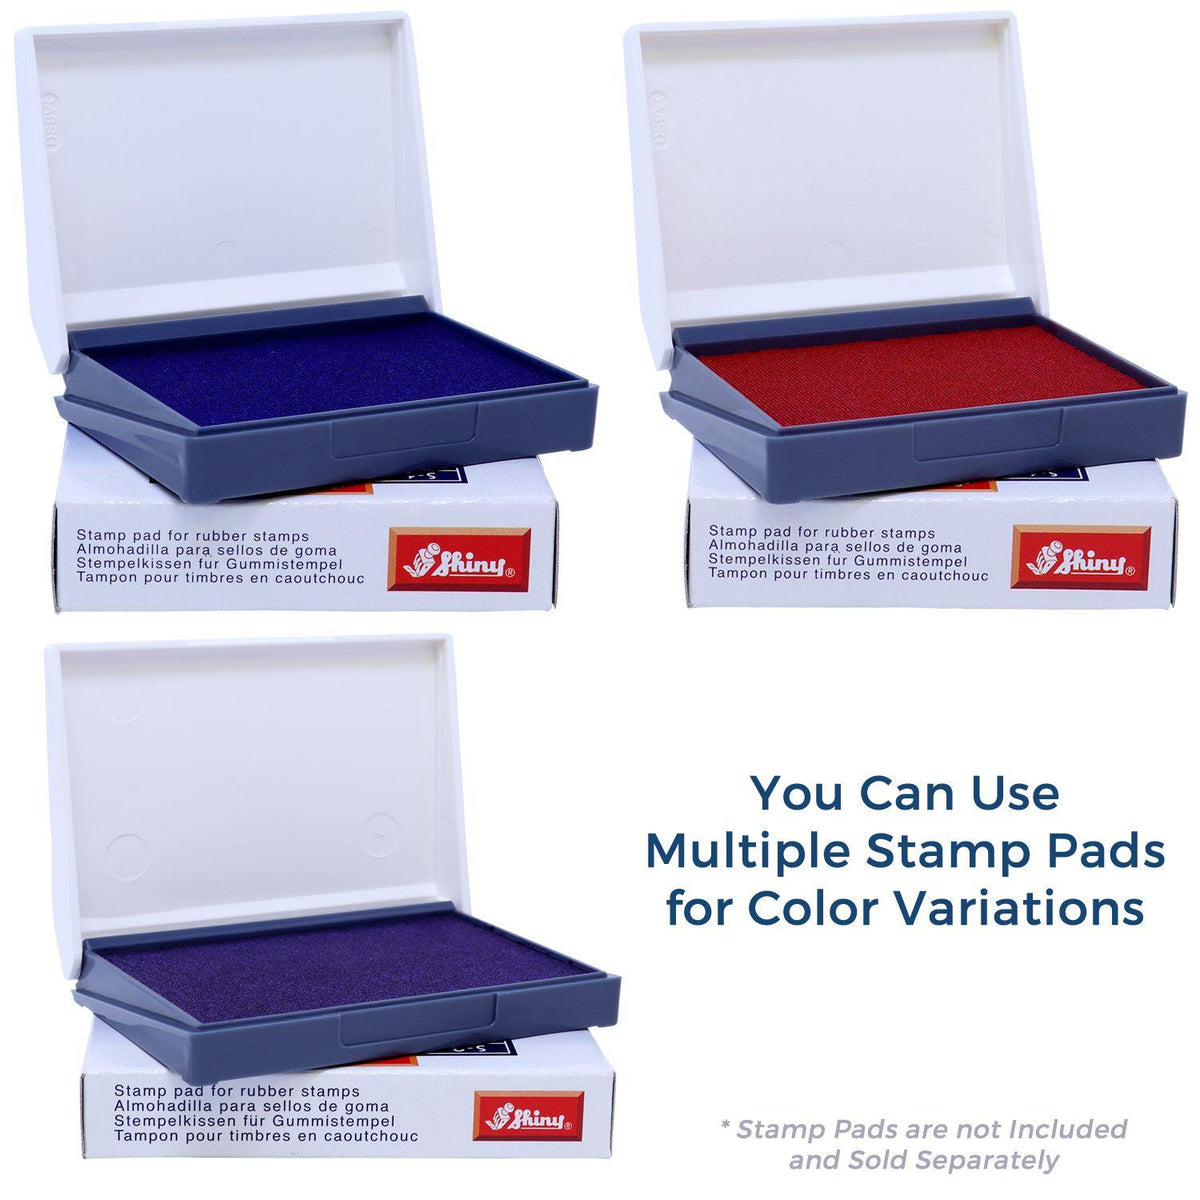 Stamp Pads for Large Entered Rubber Stamp Available